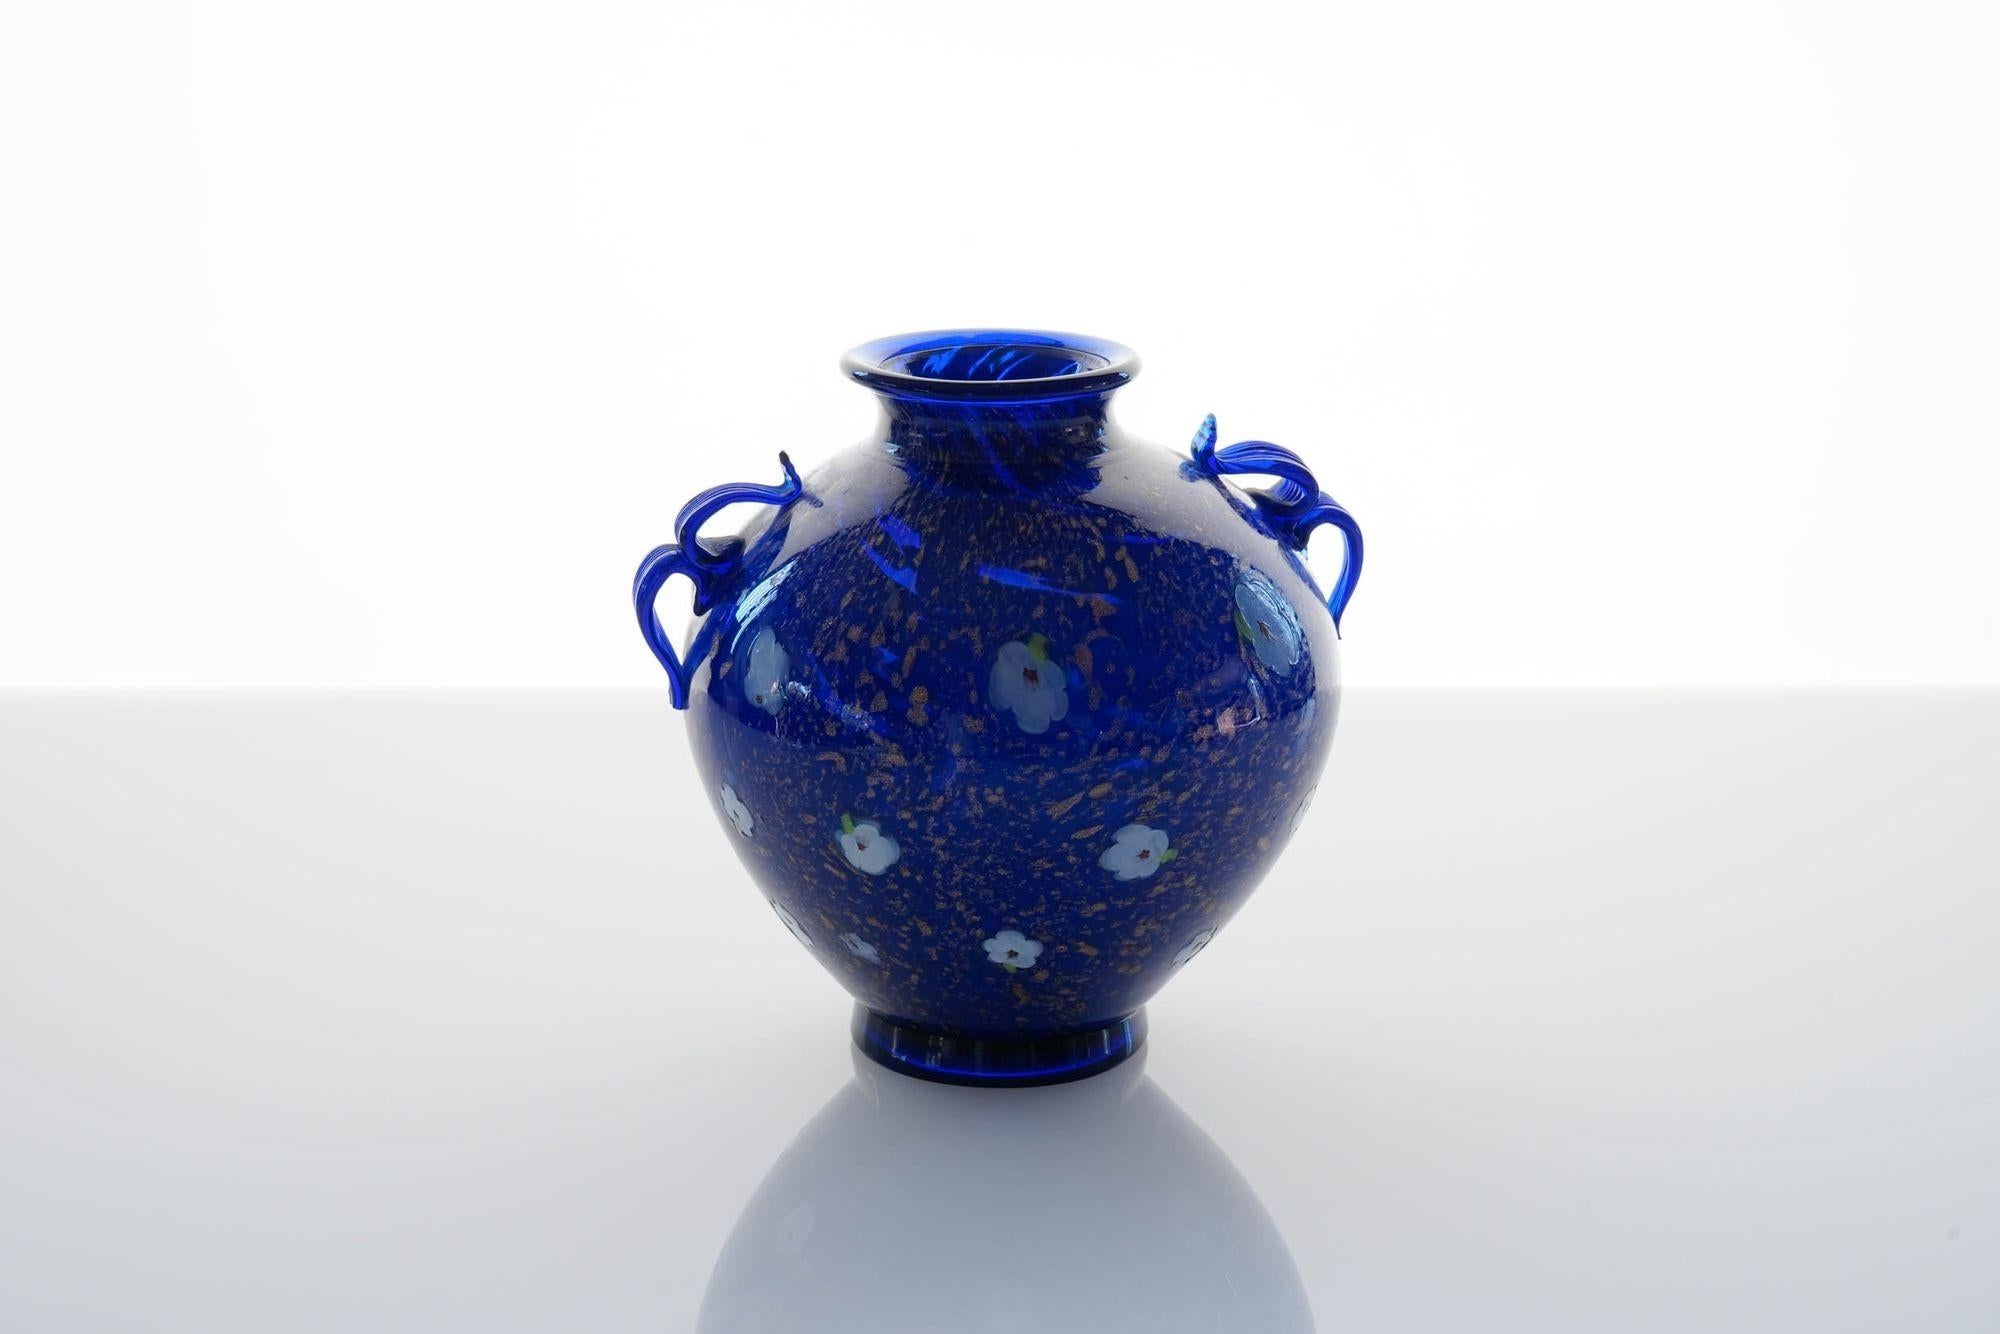 Rare vase in blue cobalt glass from Fratelli Toso.
The finish of the vase is with Avventurina speckling fused over the glass (Tociato in Muranese) to resemble Lapis Lazuli gemstone. Over that the vase has beautiful peach flower murrinas made by